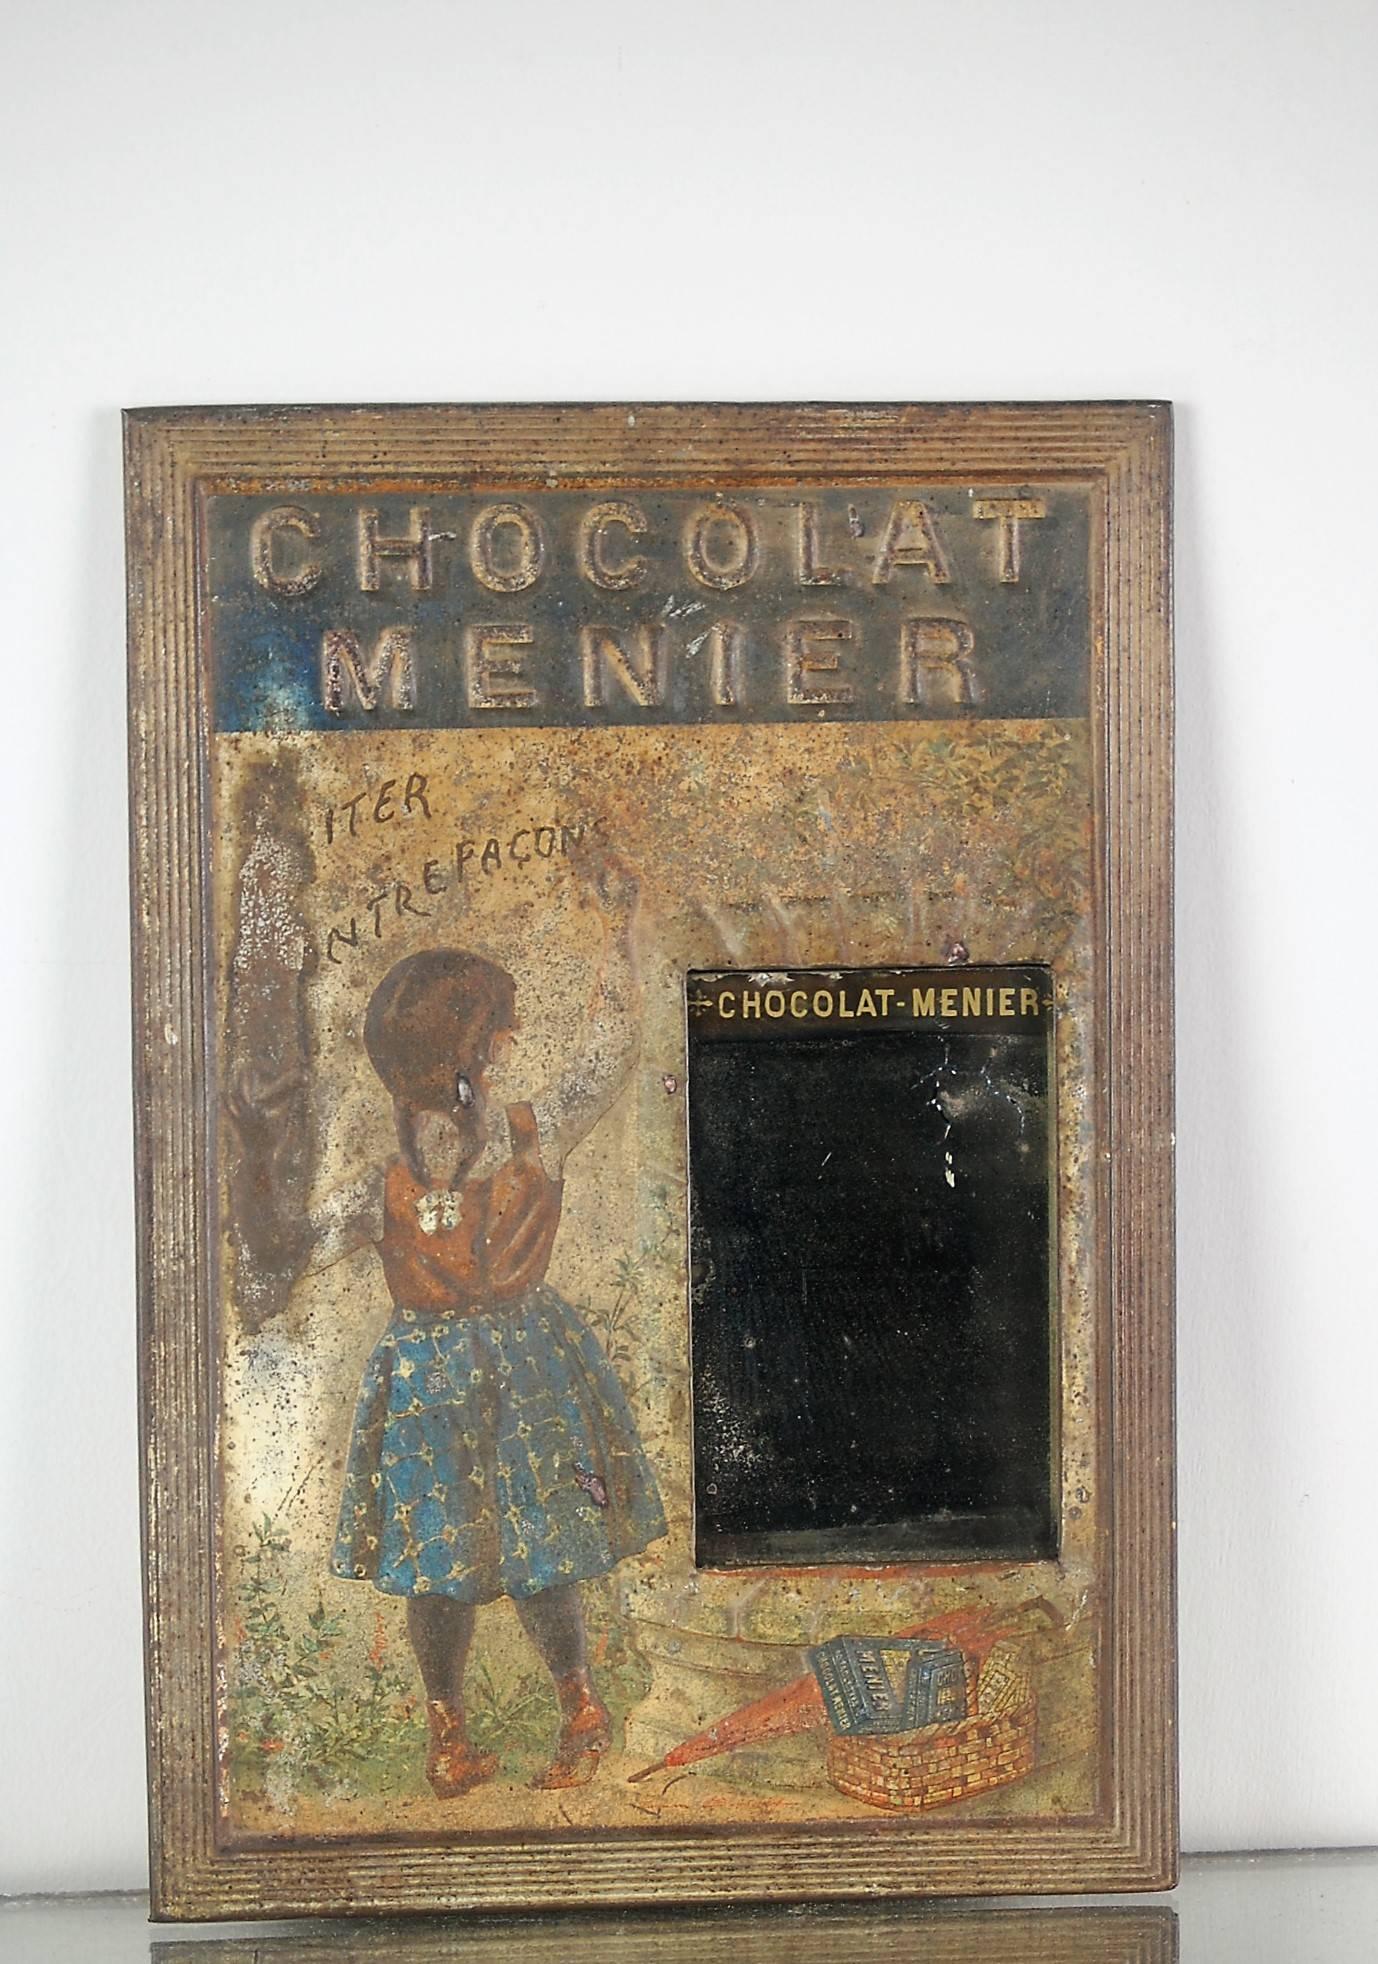 Charming Menier Chocolat point of sale advertising mirror. Original printing of this iconic image by Firmin Bouisset. Produced in the 1890s. Totally original. Mirror is distressed, painted tin is worn.